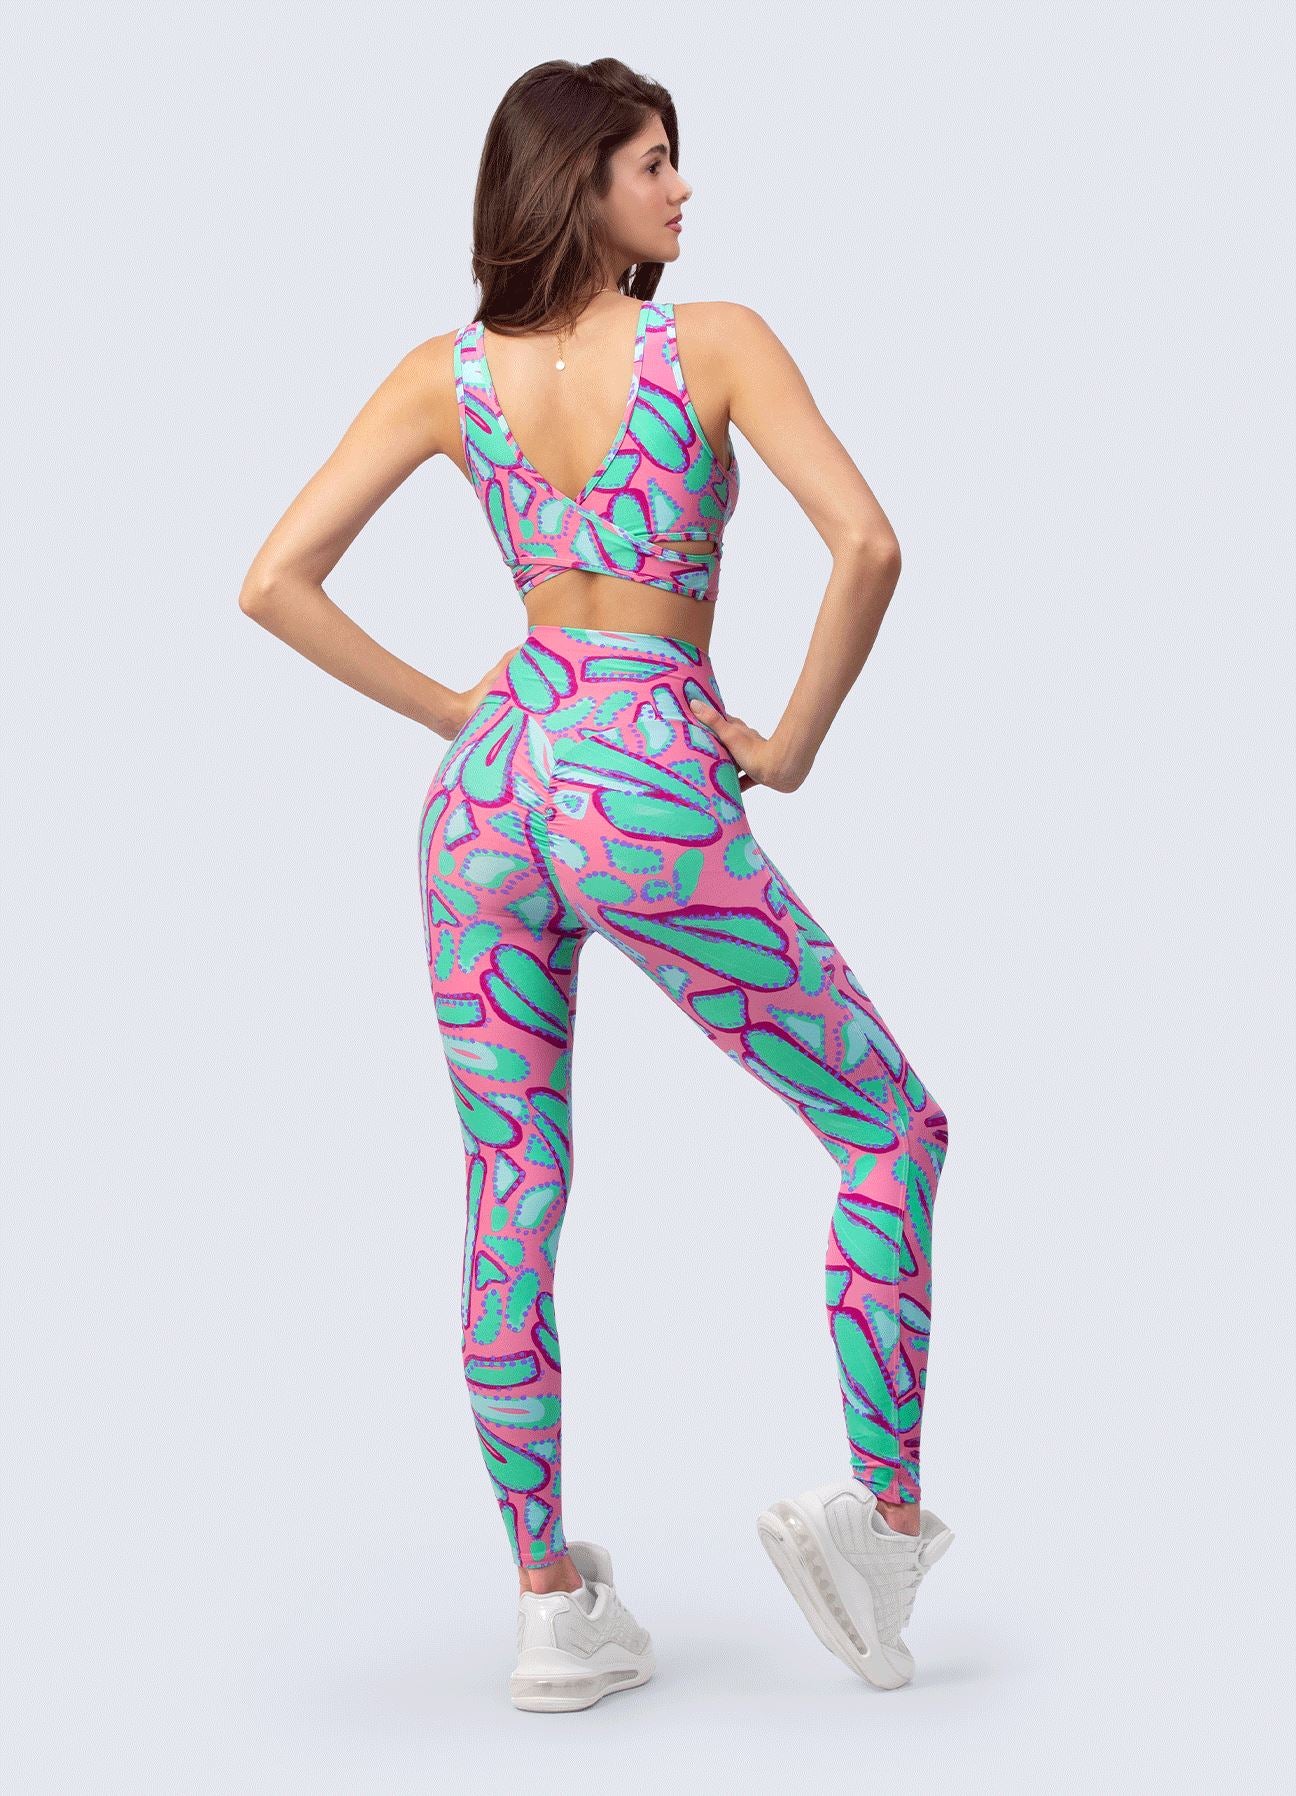 TOP SCRUNCH PRINT 3D - AB5 TOPS WINropadeportiva #ab-5